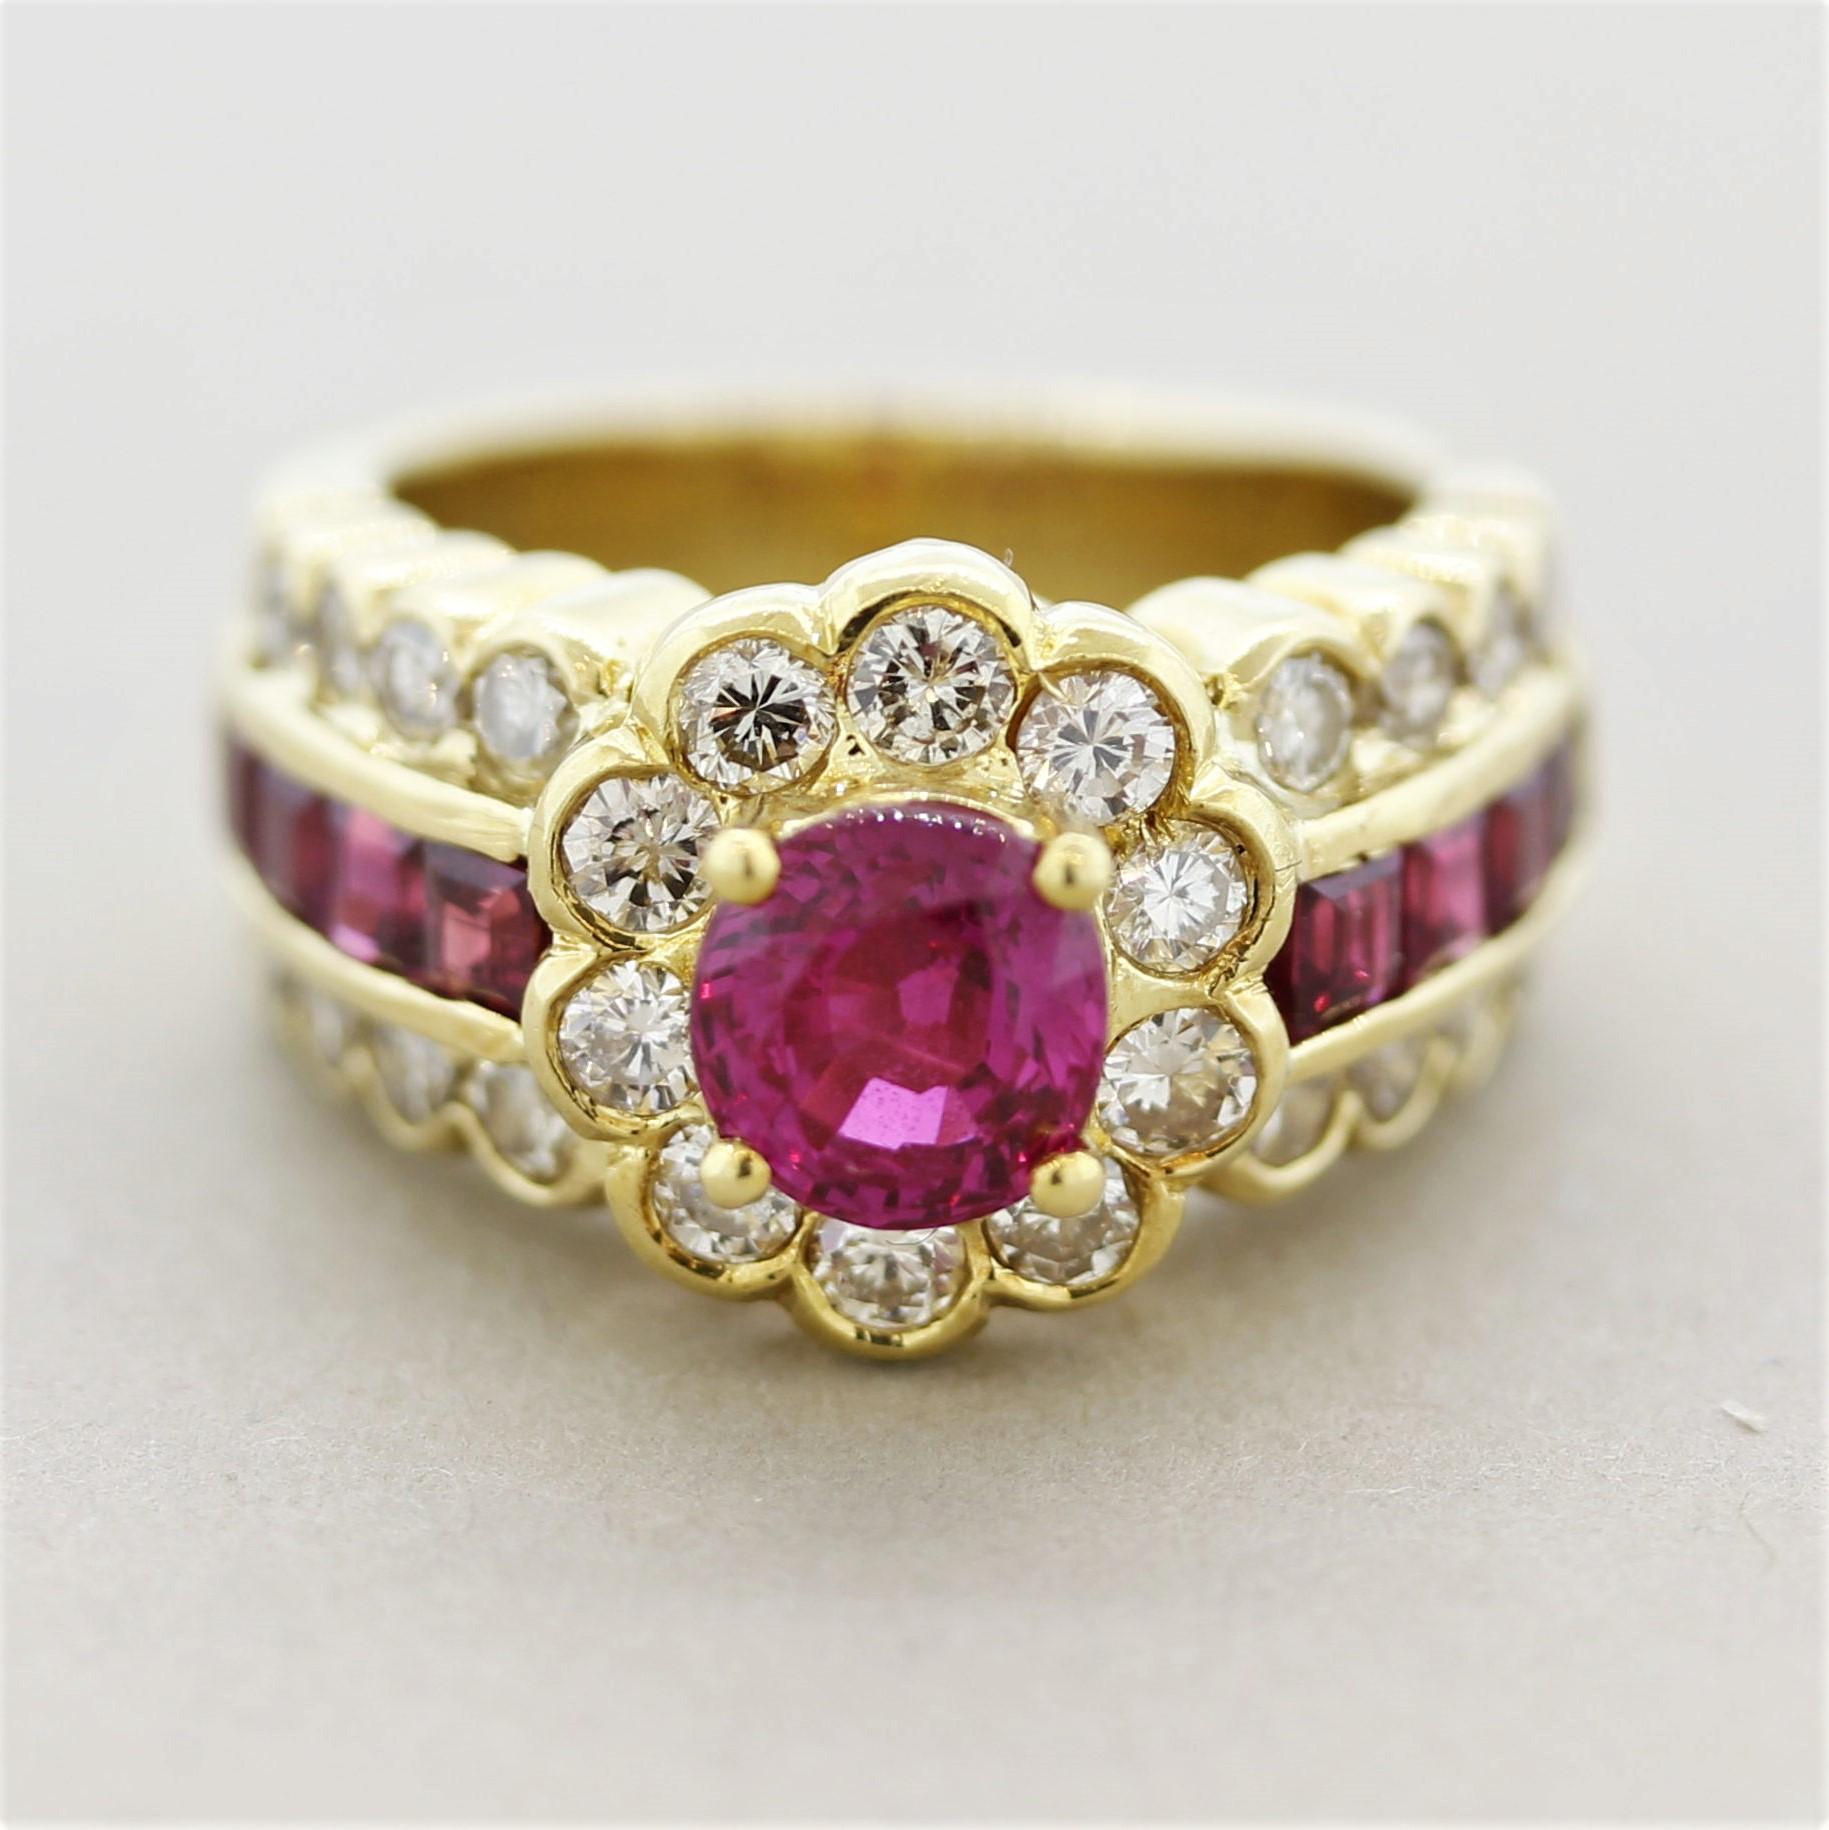 A bright and stylish ring featuring fine rubies and diamonds! The center ruby weighs 0.92 carats and has a bright vivid slightly pinkish red color, typical of Burmese stones. On the sides are rows and diamonds and square-shape rubies channel-set